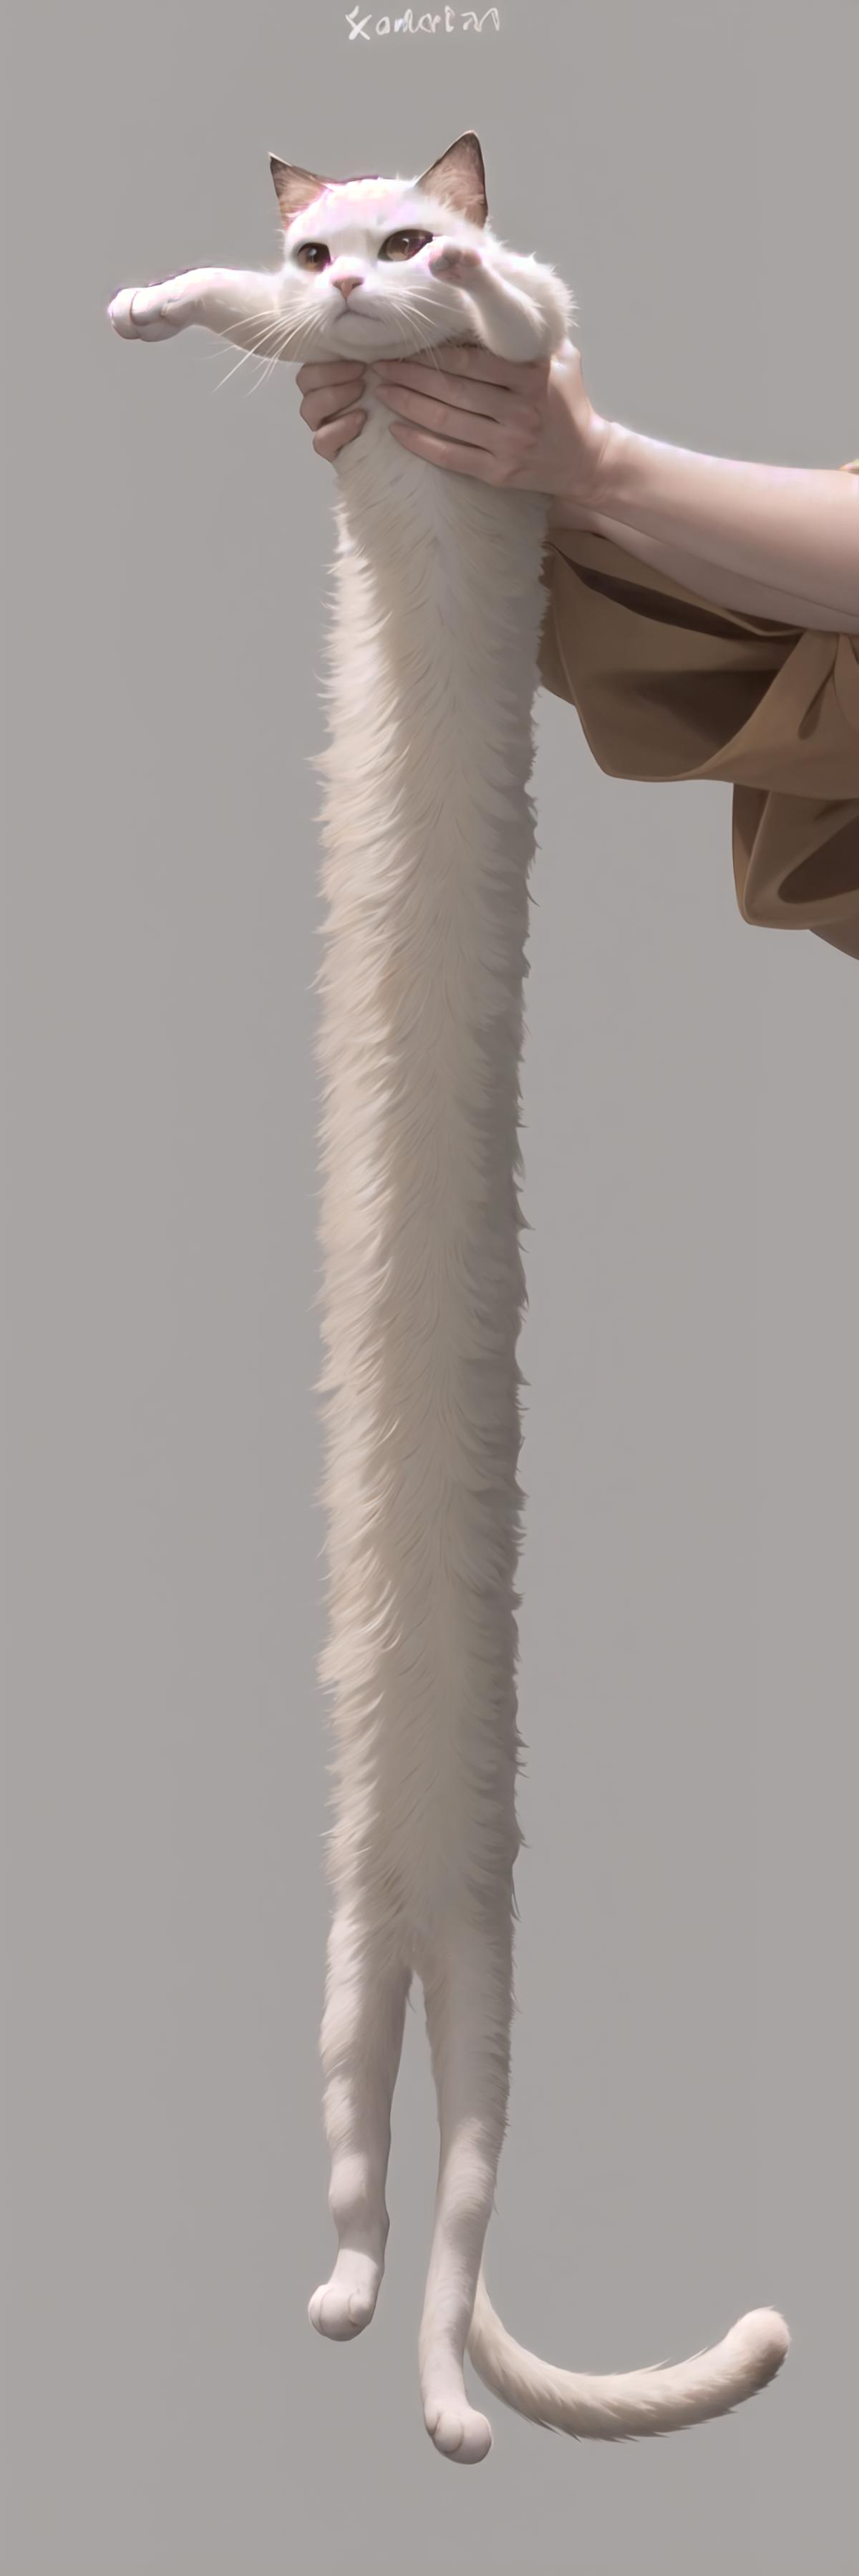 A very long and furry neck of a creature in a gray background.